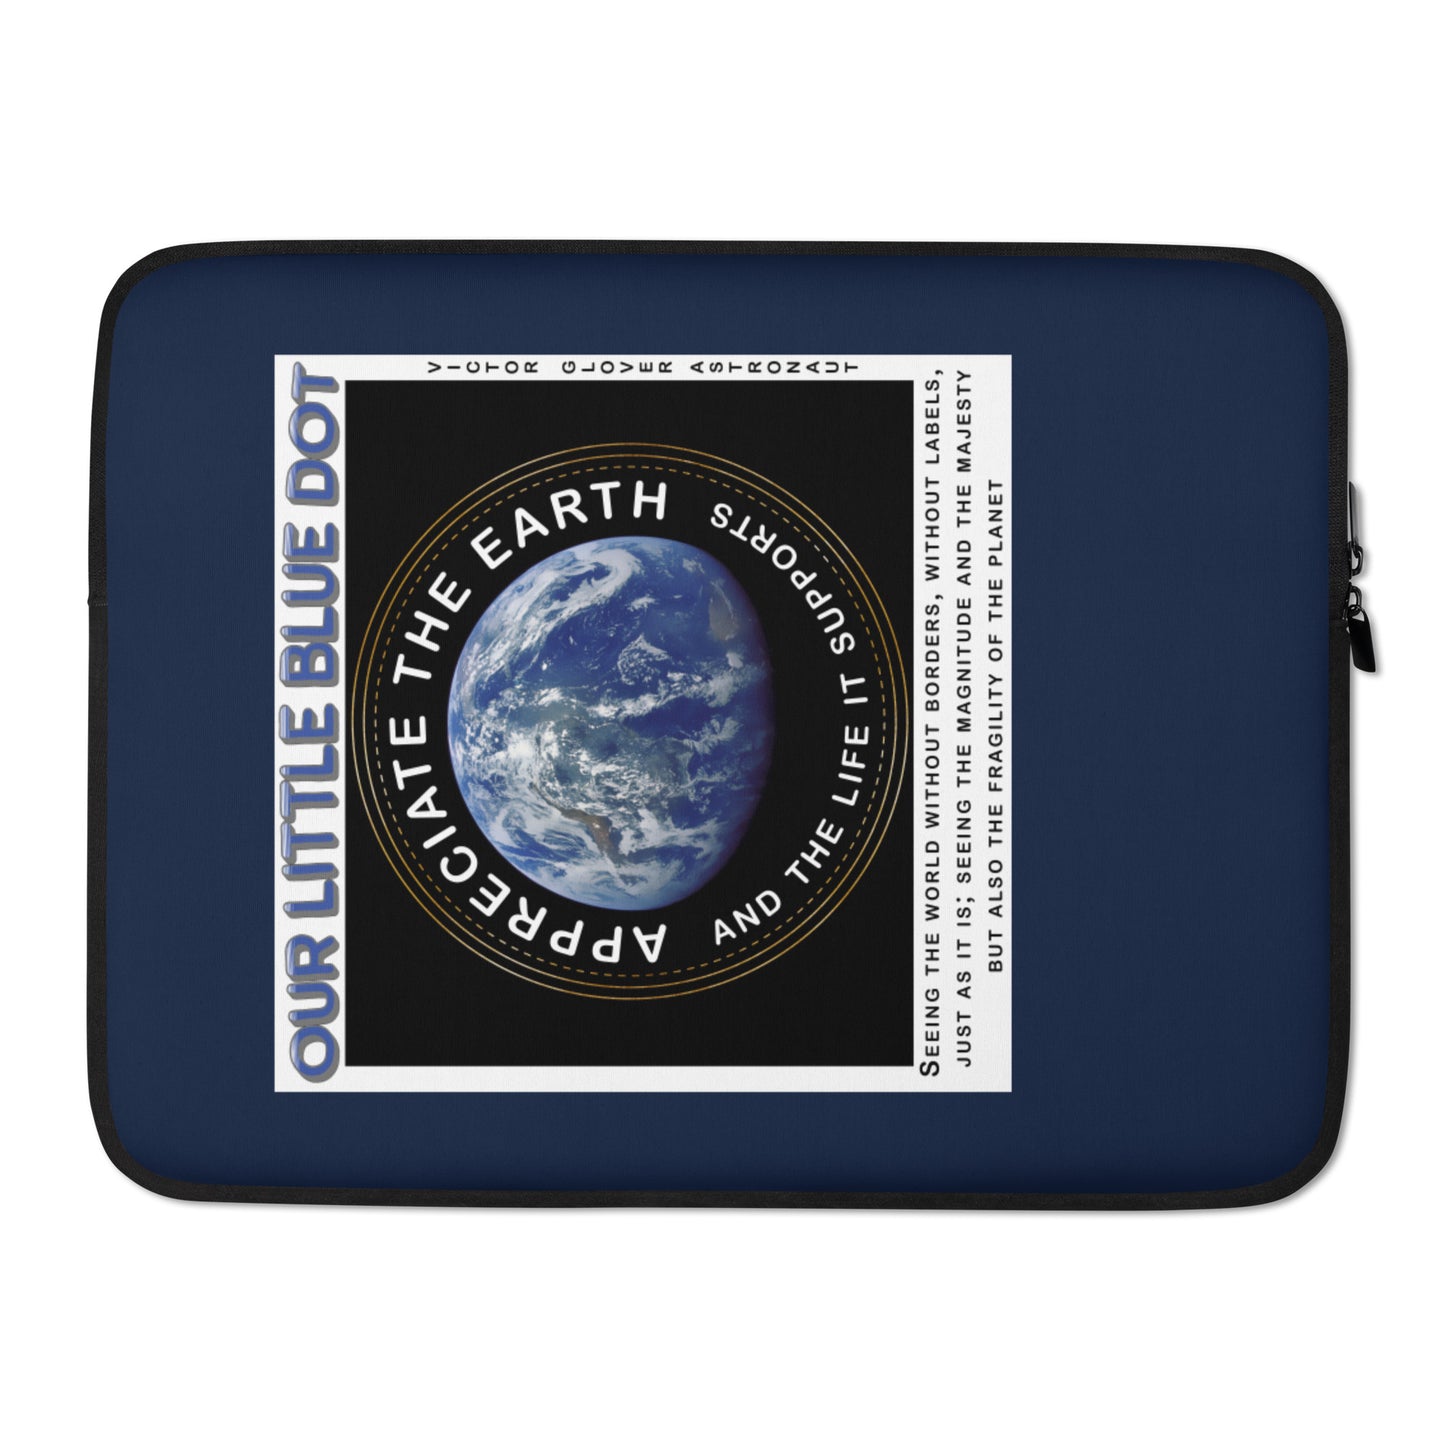 Laptop Sleeve - Appreciate The Earth and the life it supports, Victor Glover